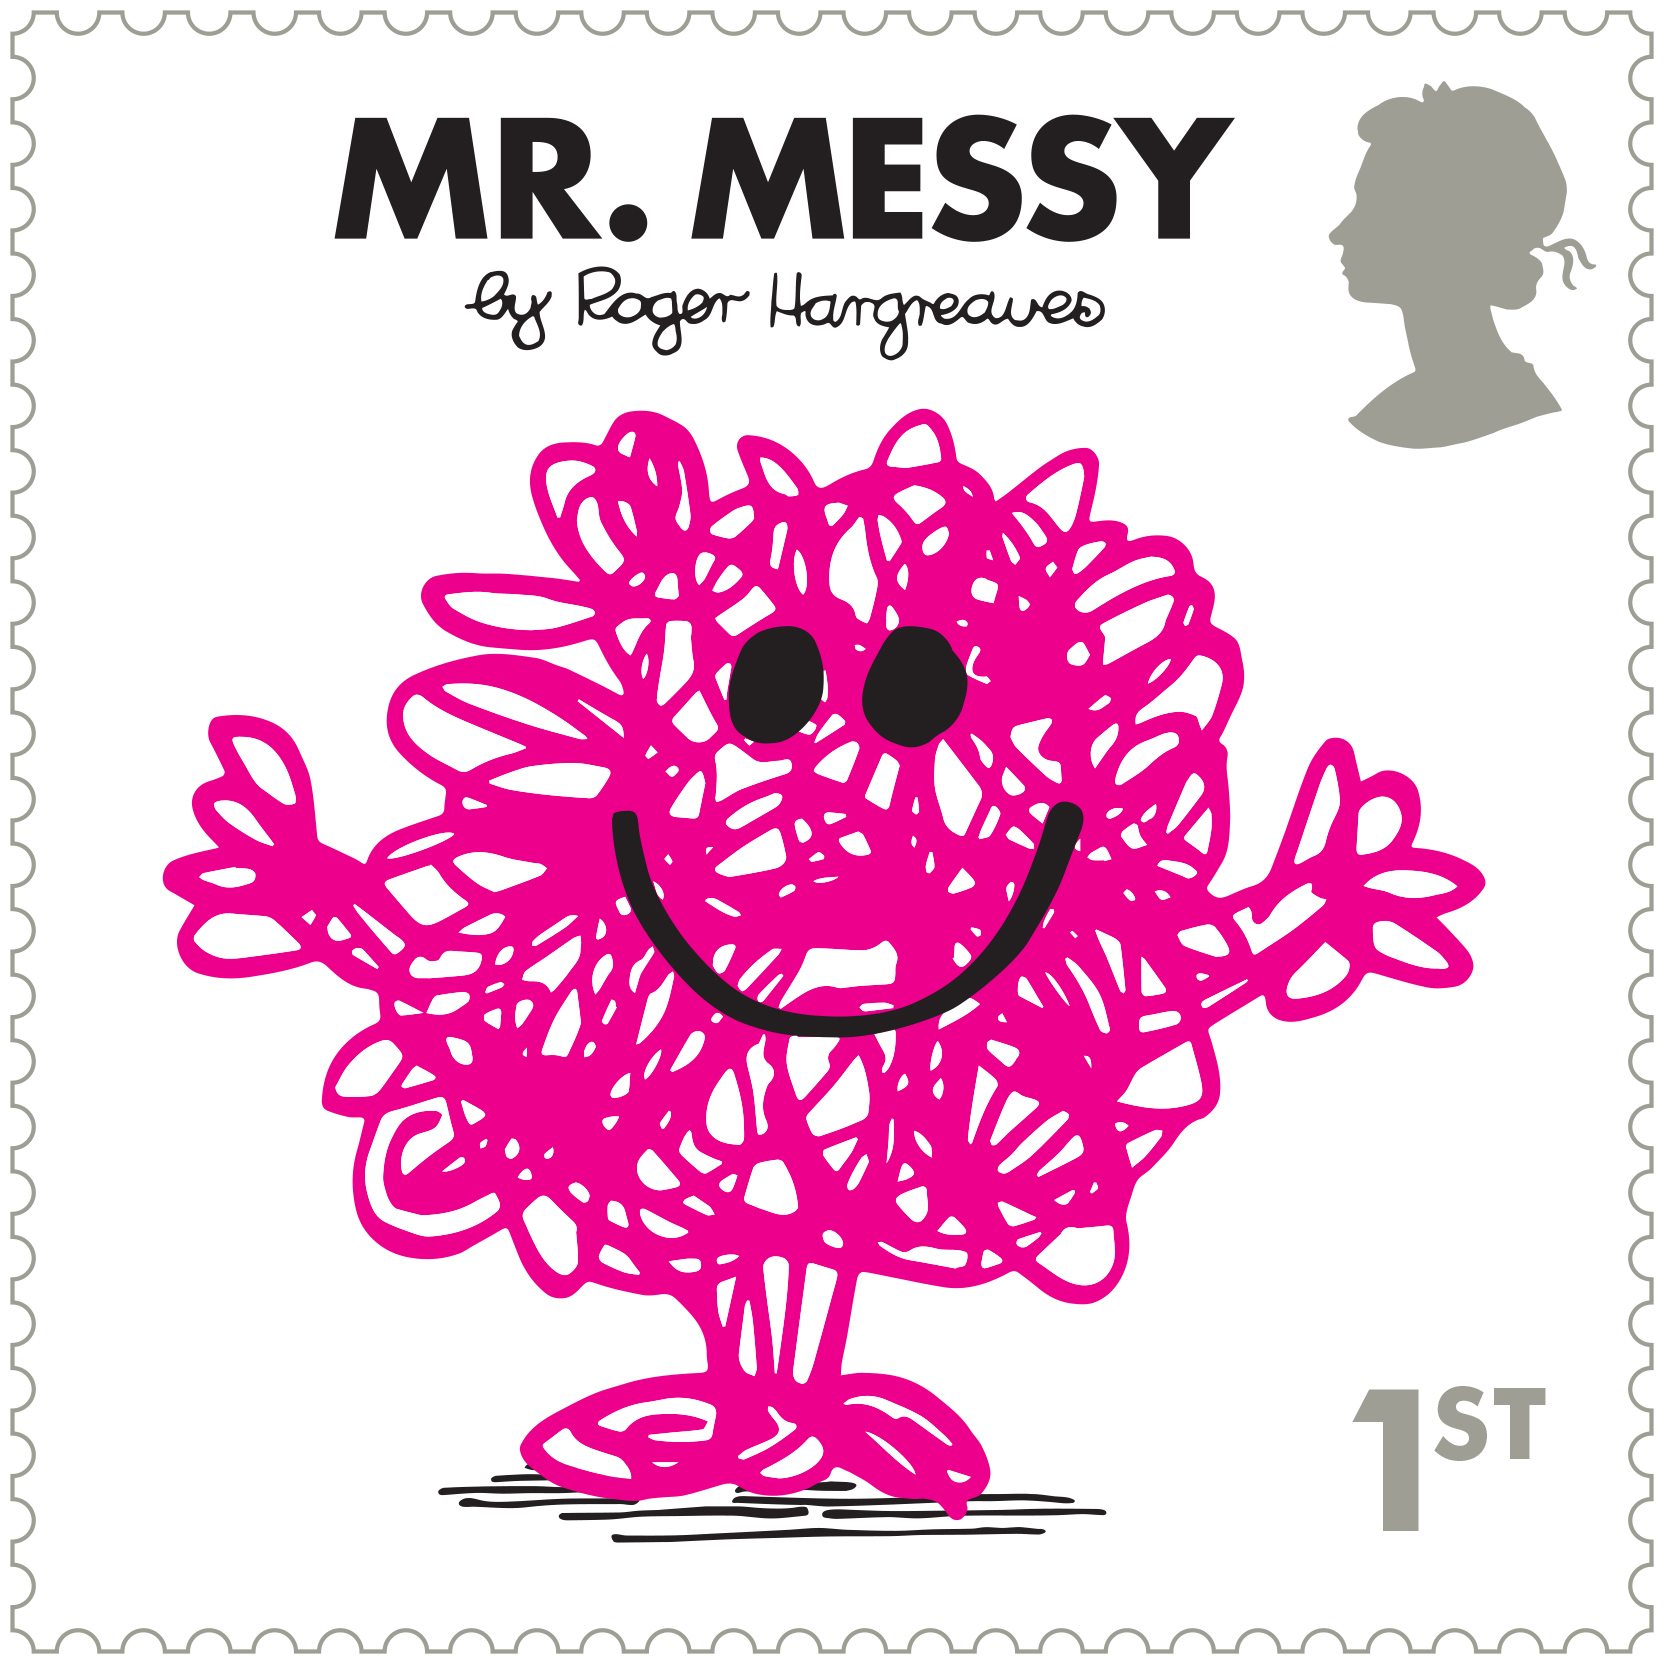 Mr Men and Little Miss stamps - Mr Messy (Royal Mail/PA)